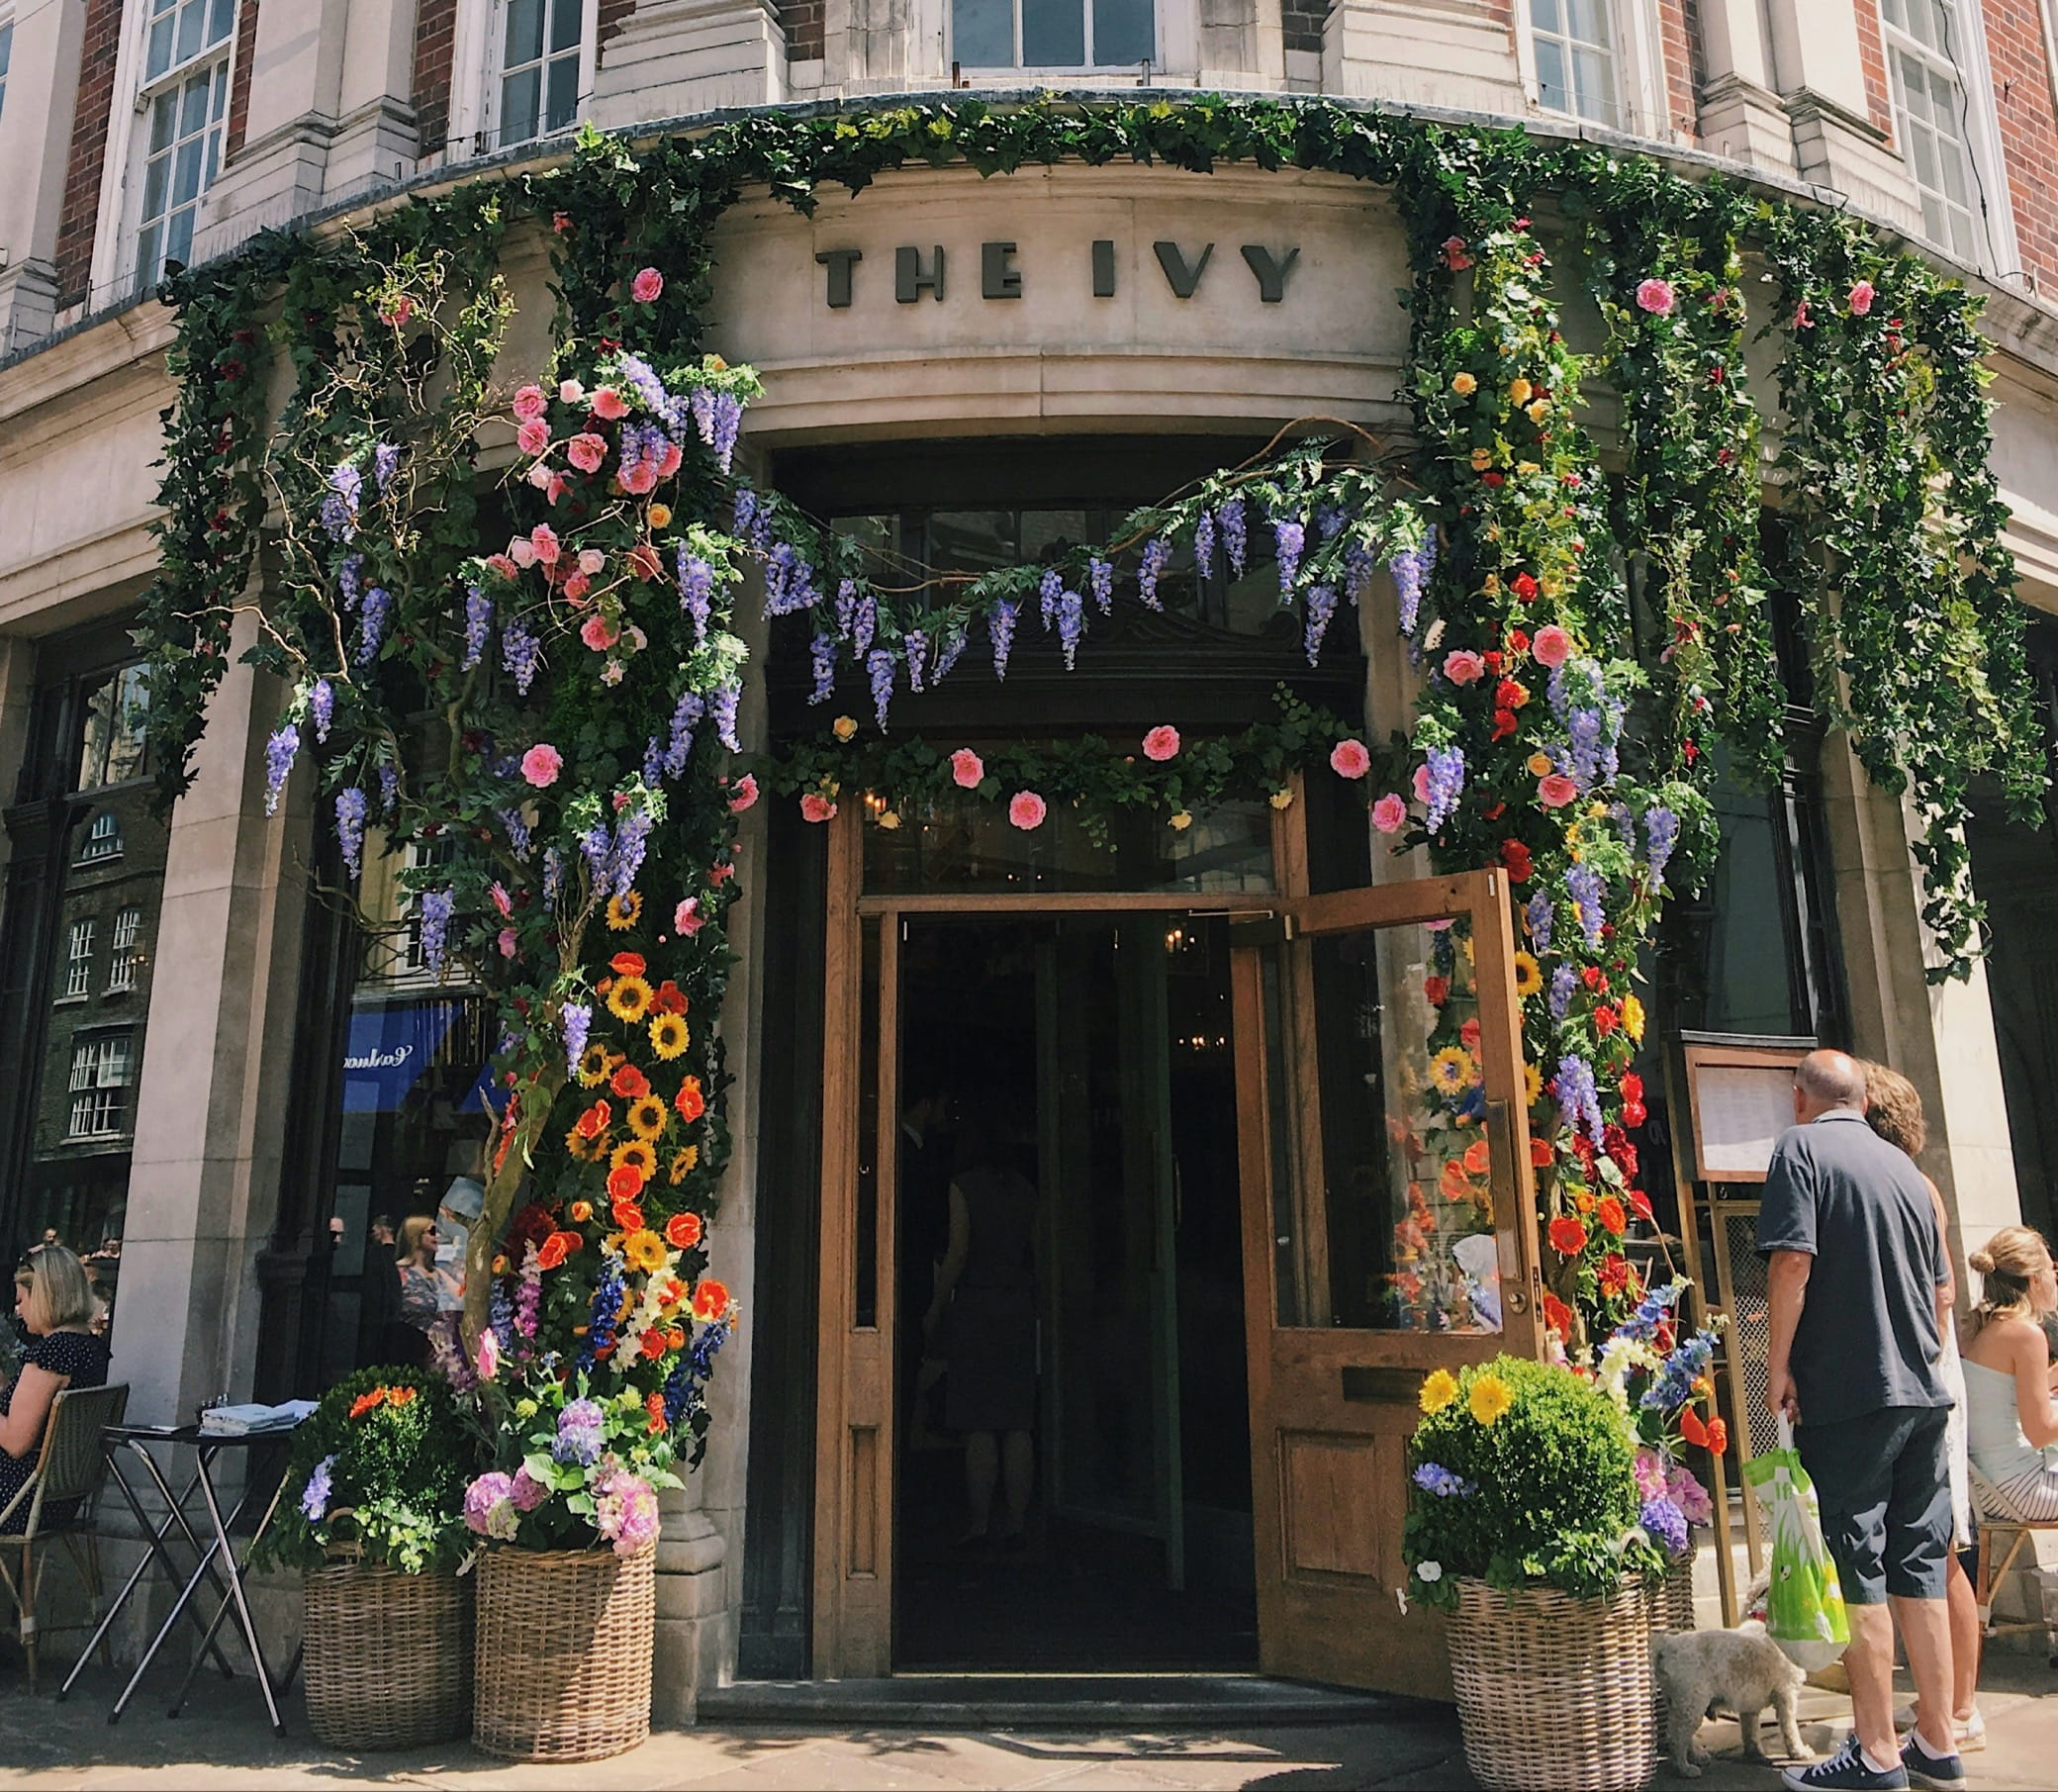 The exterior of the Ivy covered in flowers